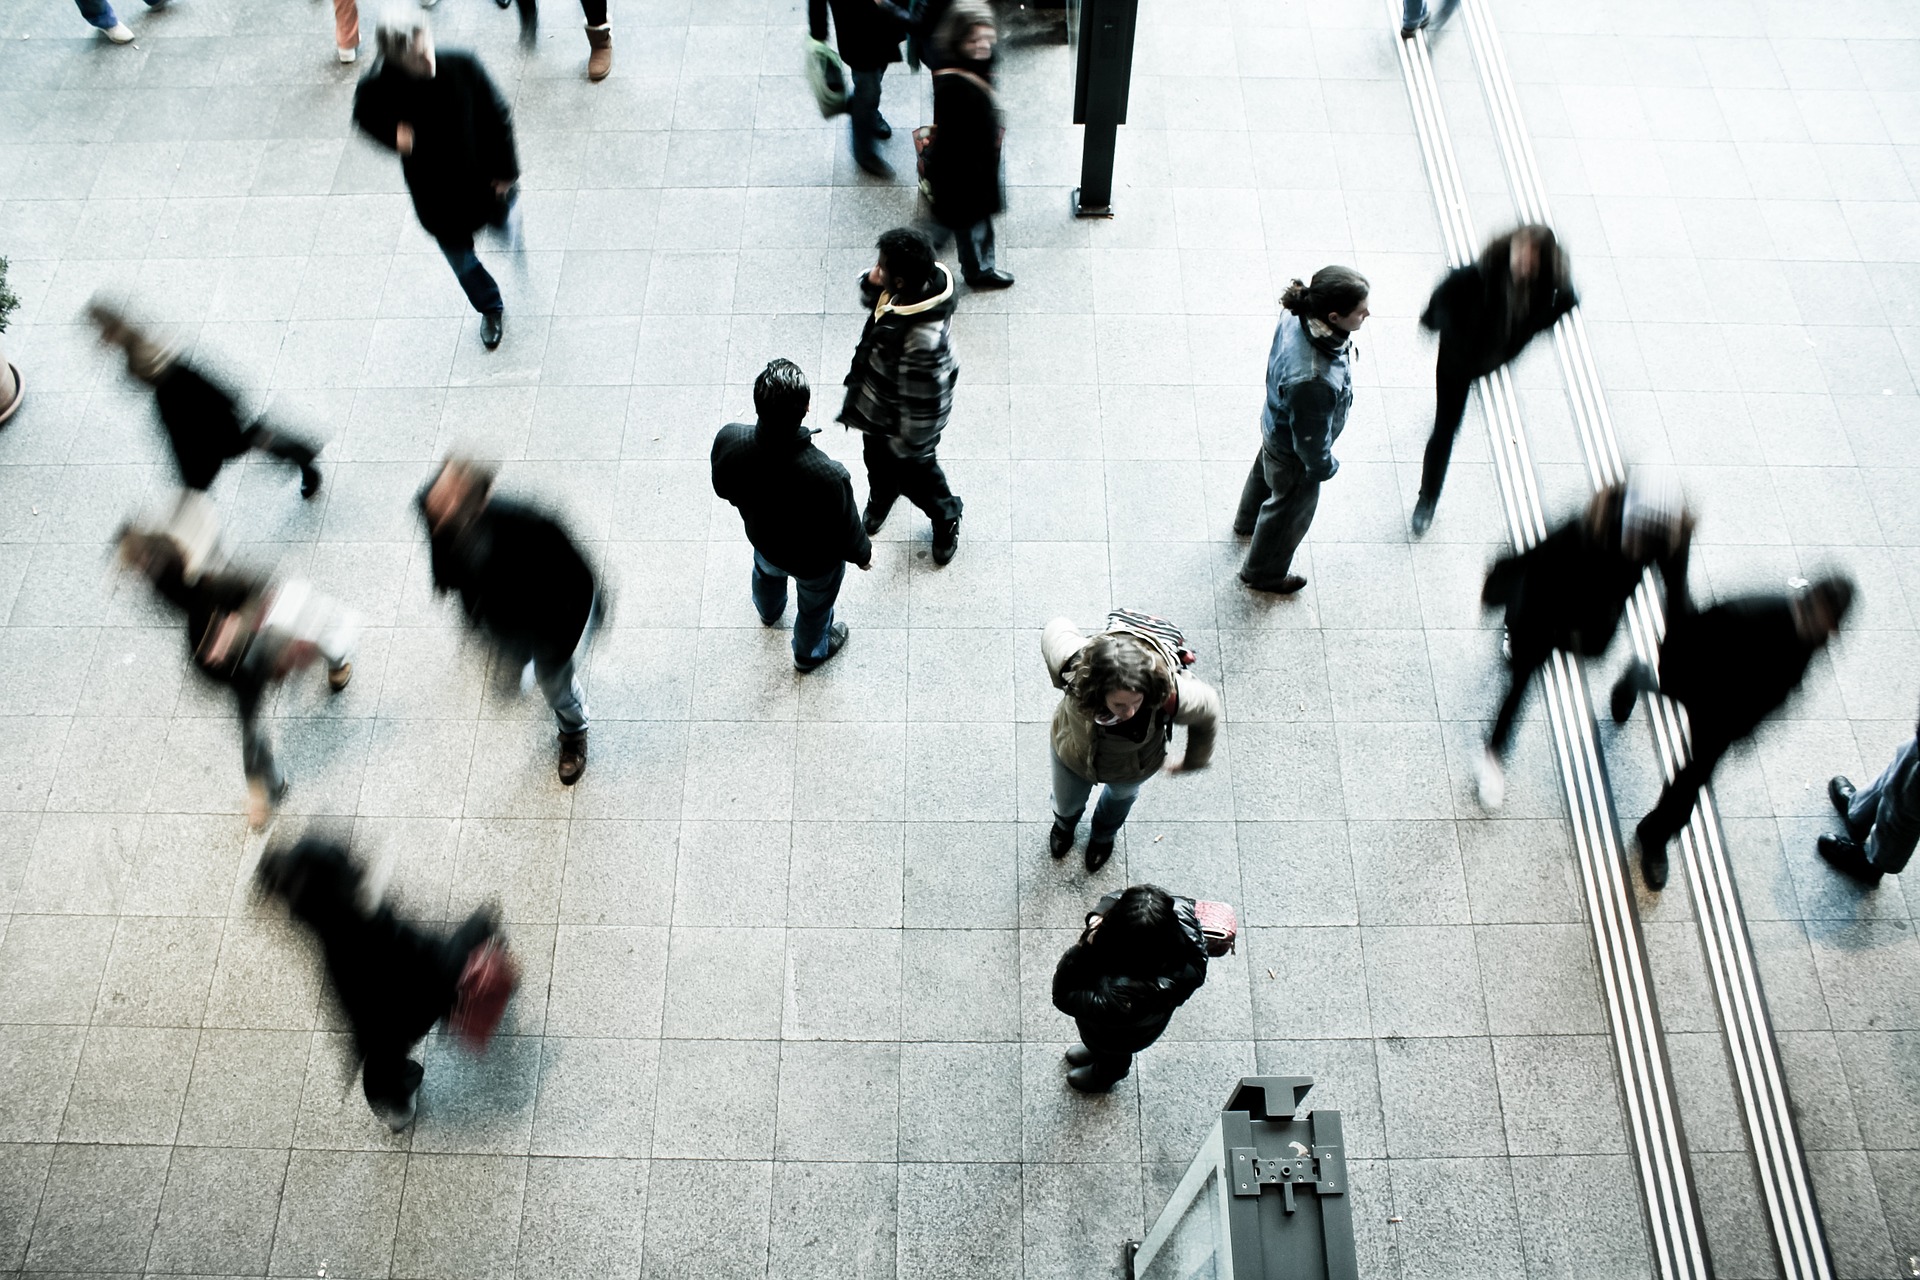 a group of people walking on a tiled floor